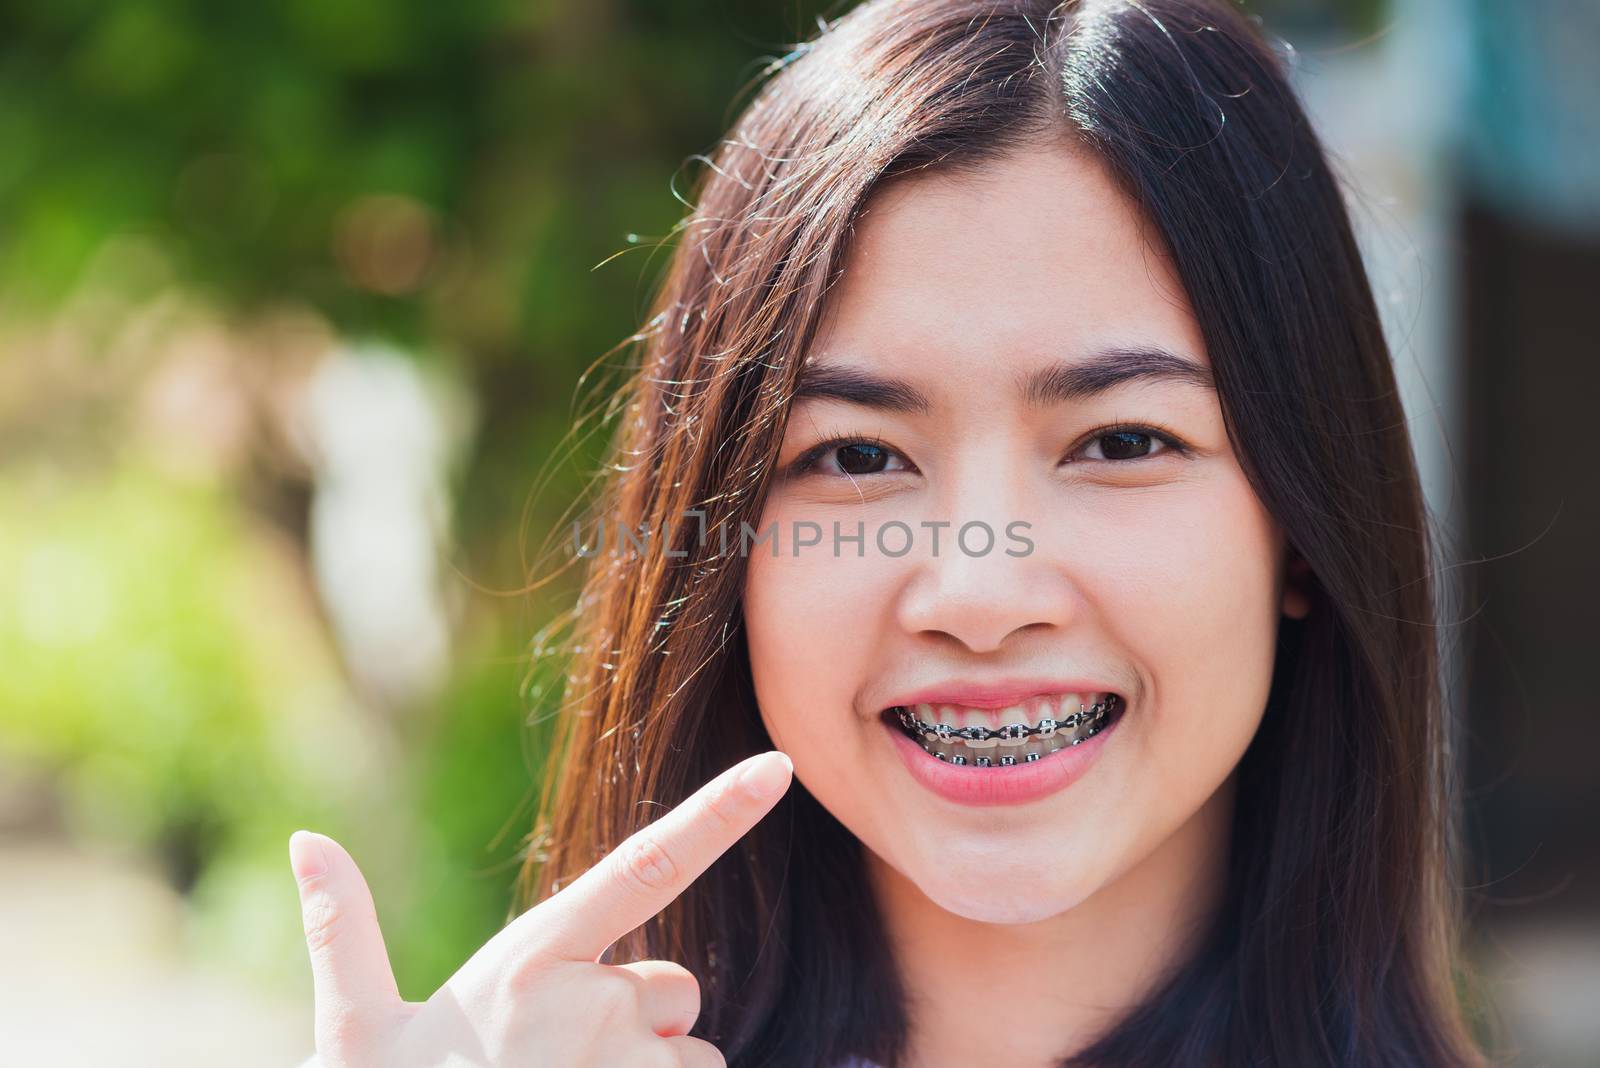 woman smile have dental braces on teeth laughing at outdoor she  by Sorapop